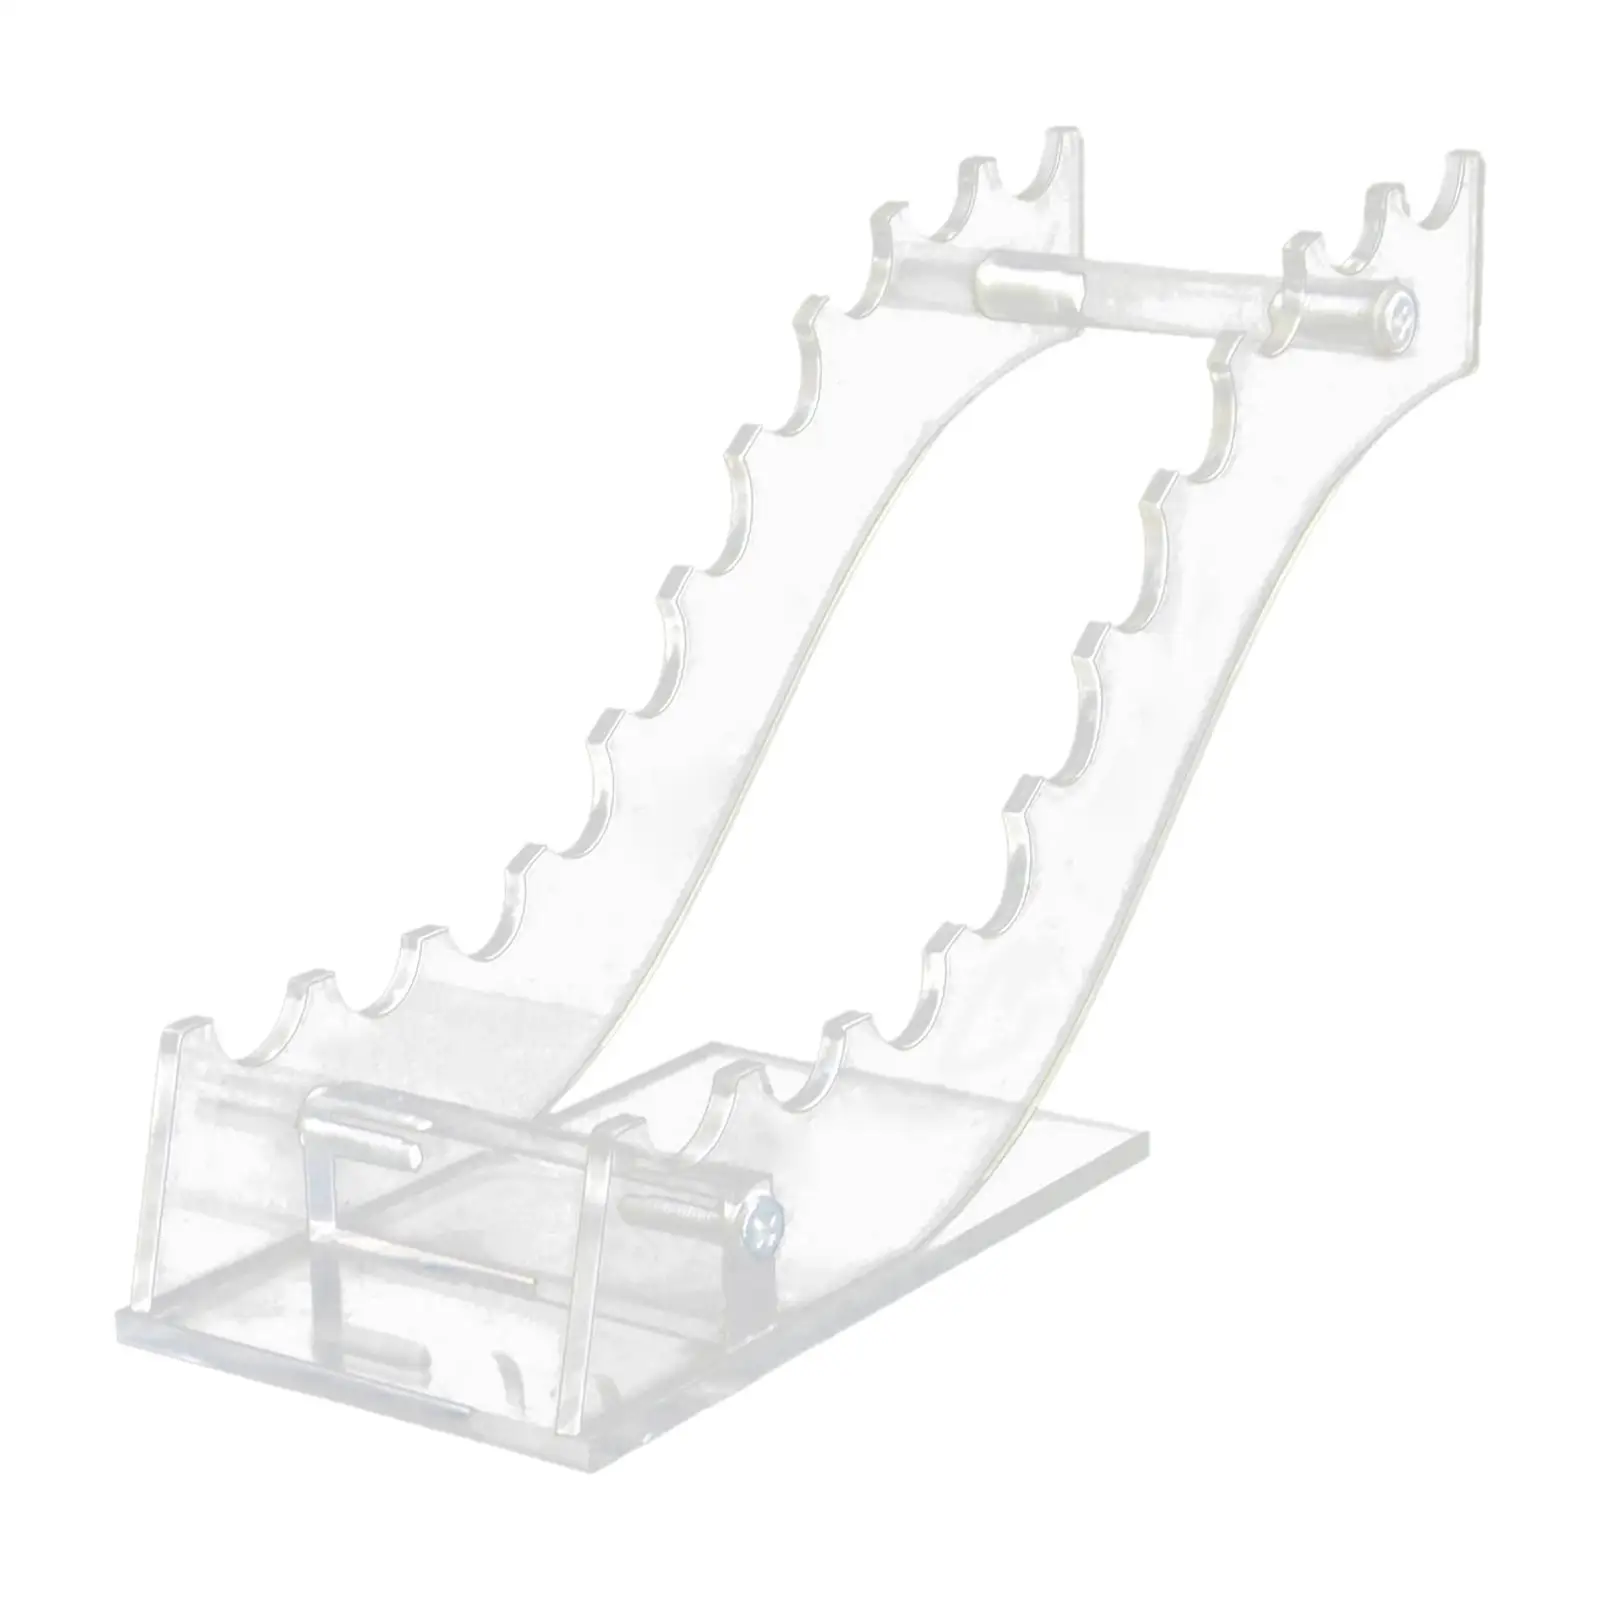 Acrylic Pen Holder Accessories Stationery Organization Pen Rack Pen Display Stand for Home Countertop